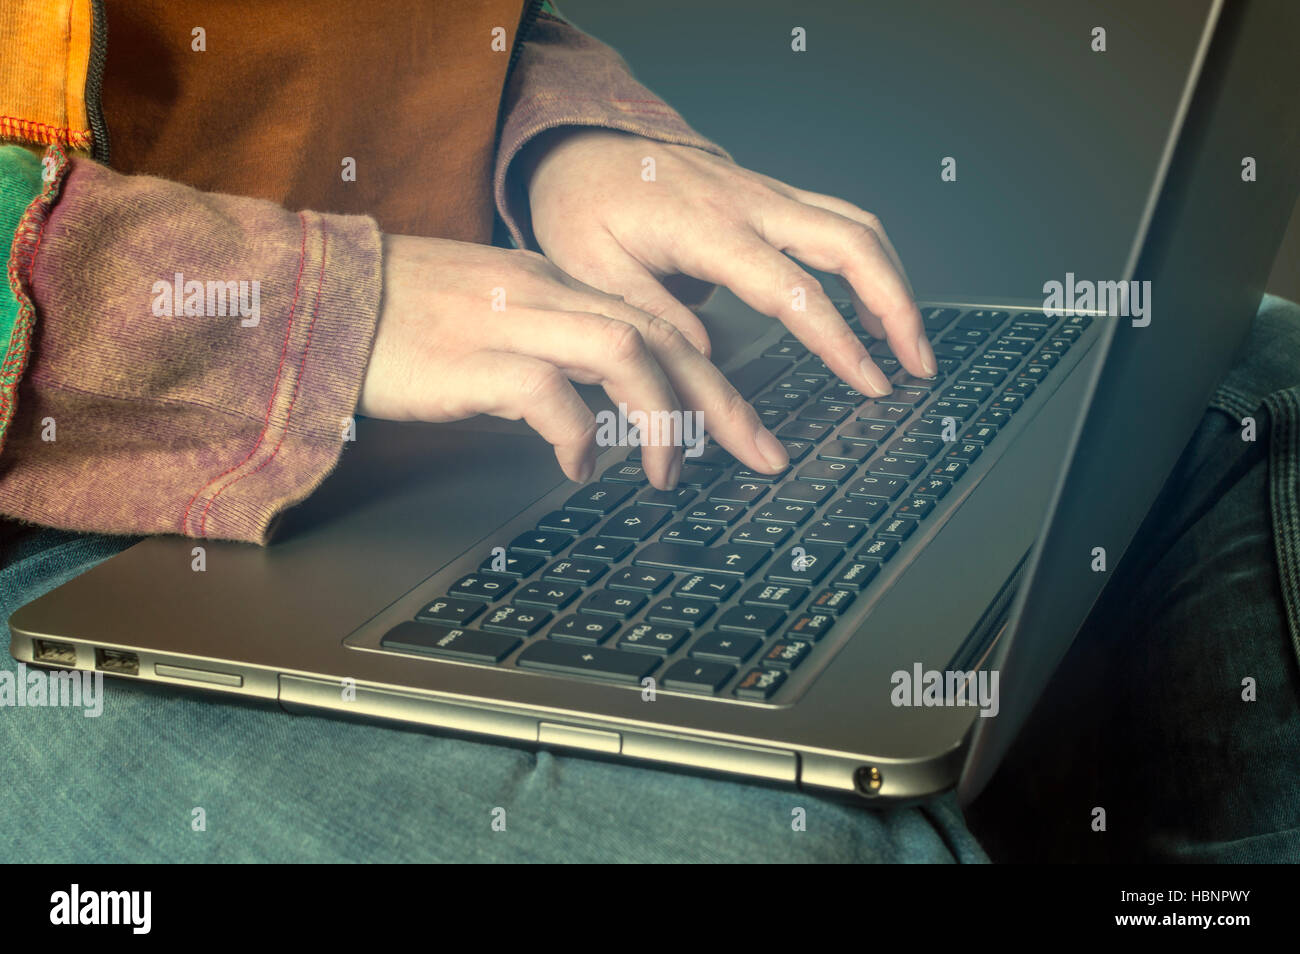 Hand typing on a laptop. Business, technology, internet and networking concept. Stock Photo